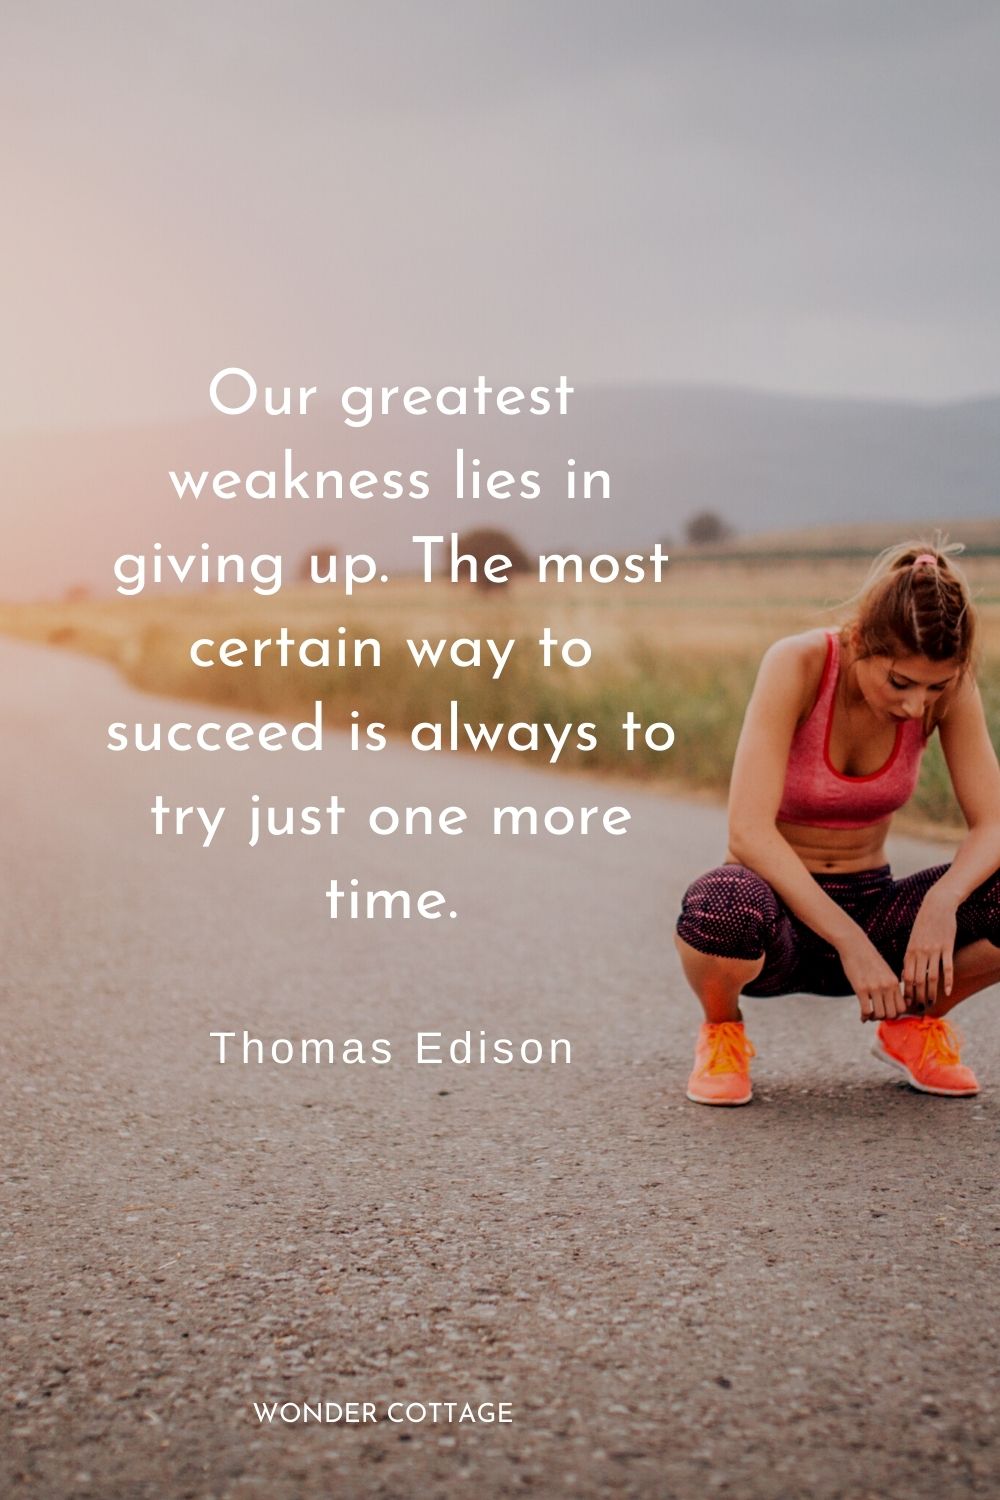 Our greatest weakness lies in giving up. The most certain way to succeed is always to try just one more time. Thomas Edison